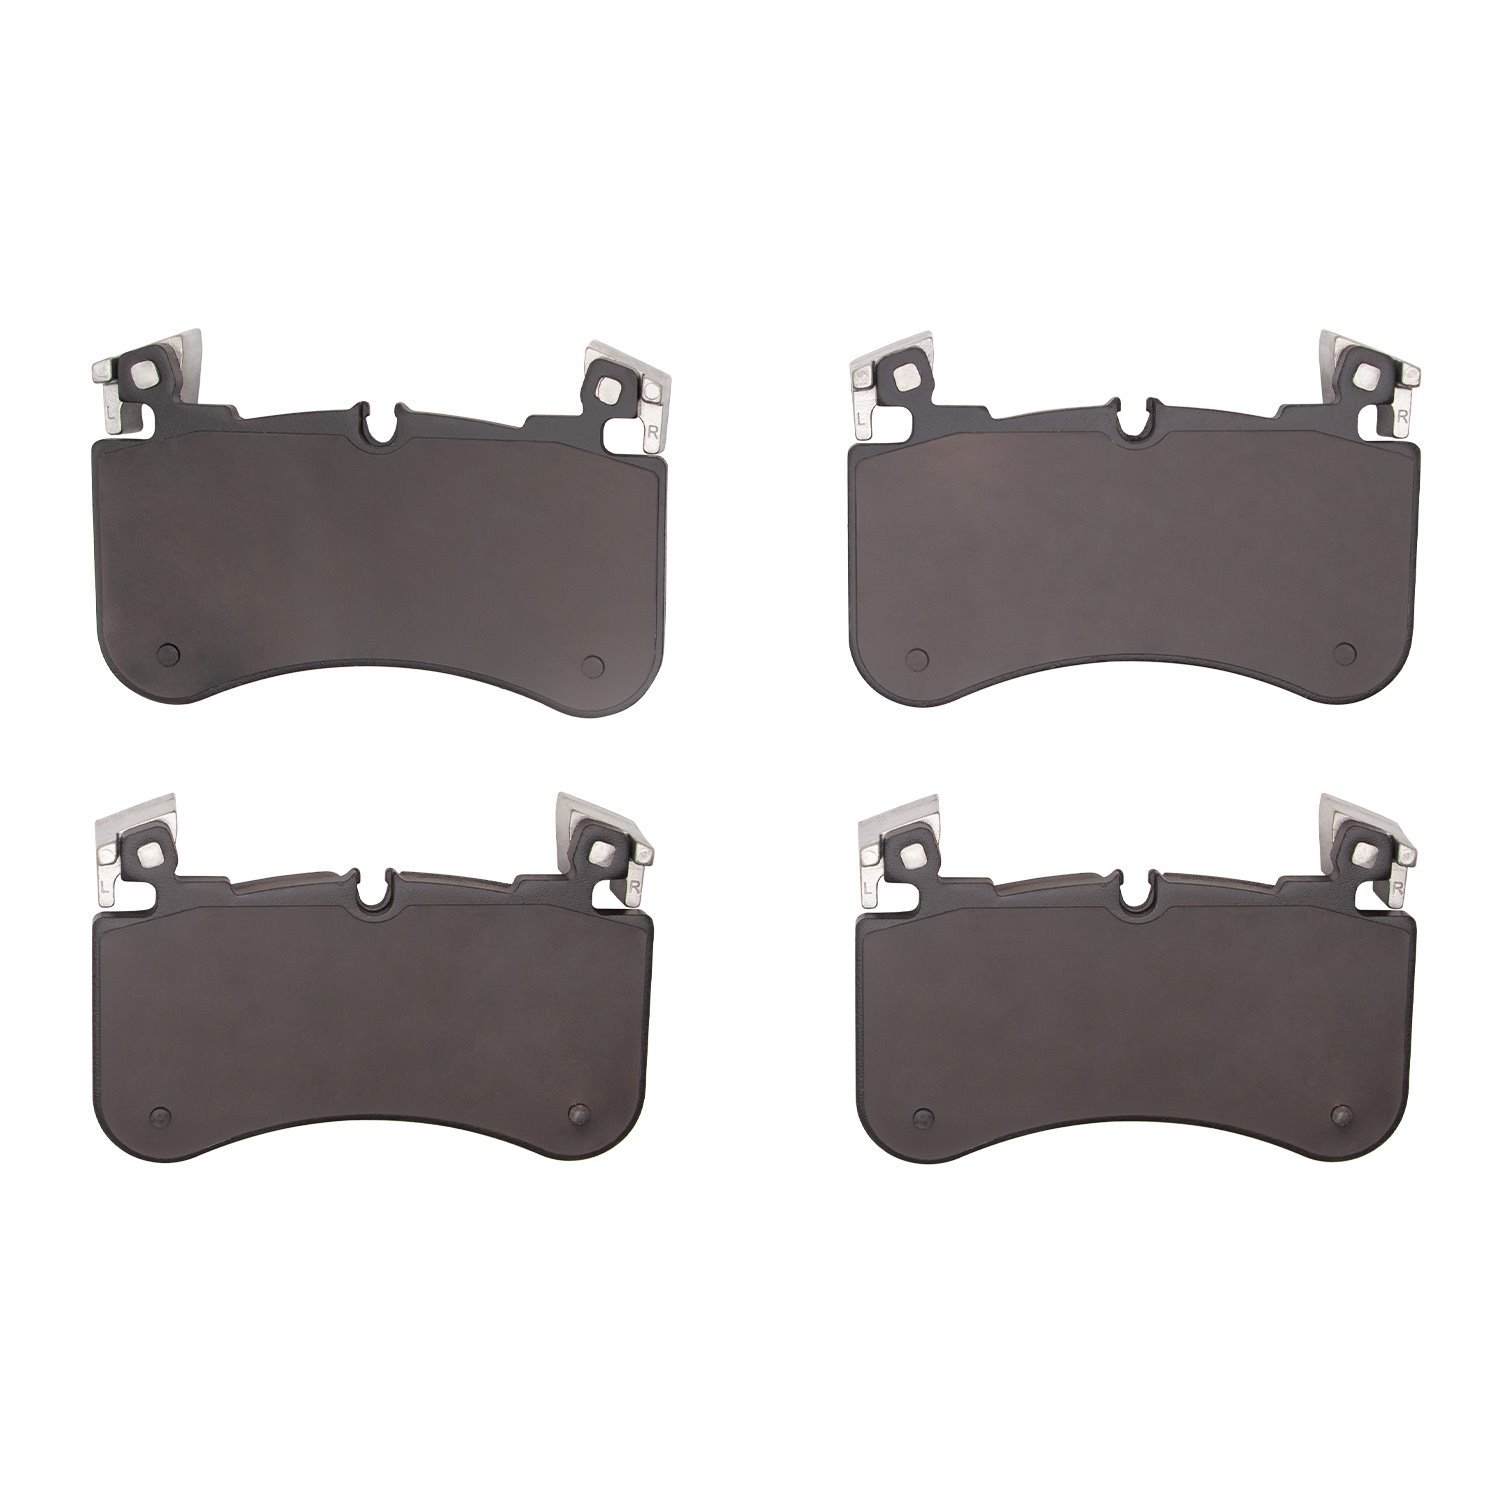 1310-2184-00 3000-Series Ceramic Brake Pads, Fits Select Land Rover, Position: Front